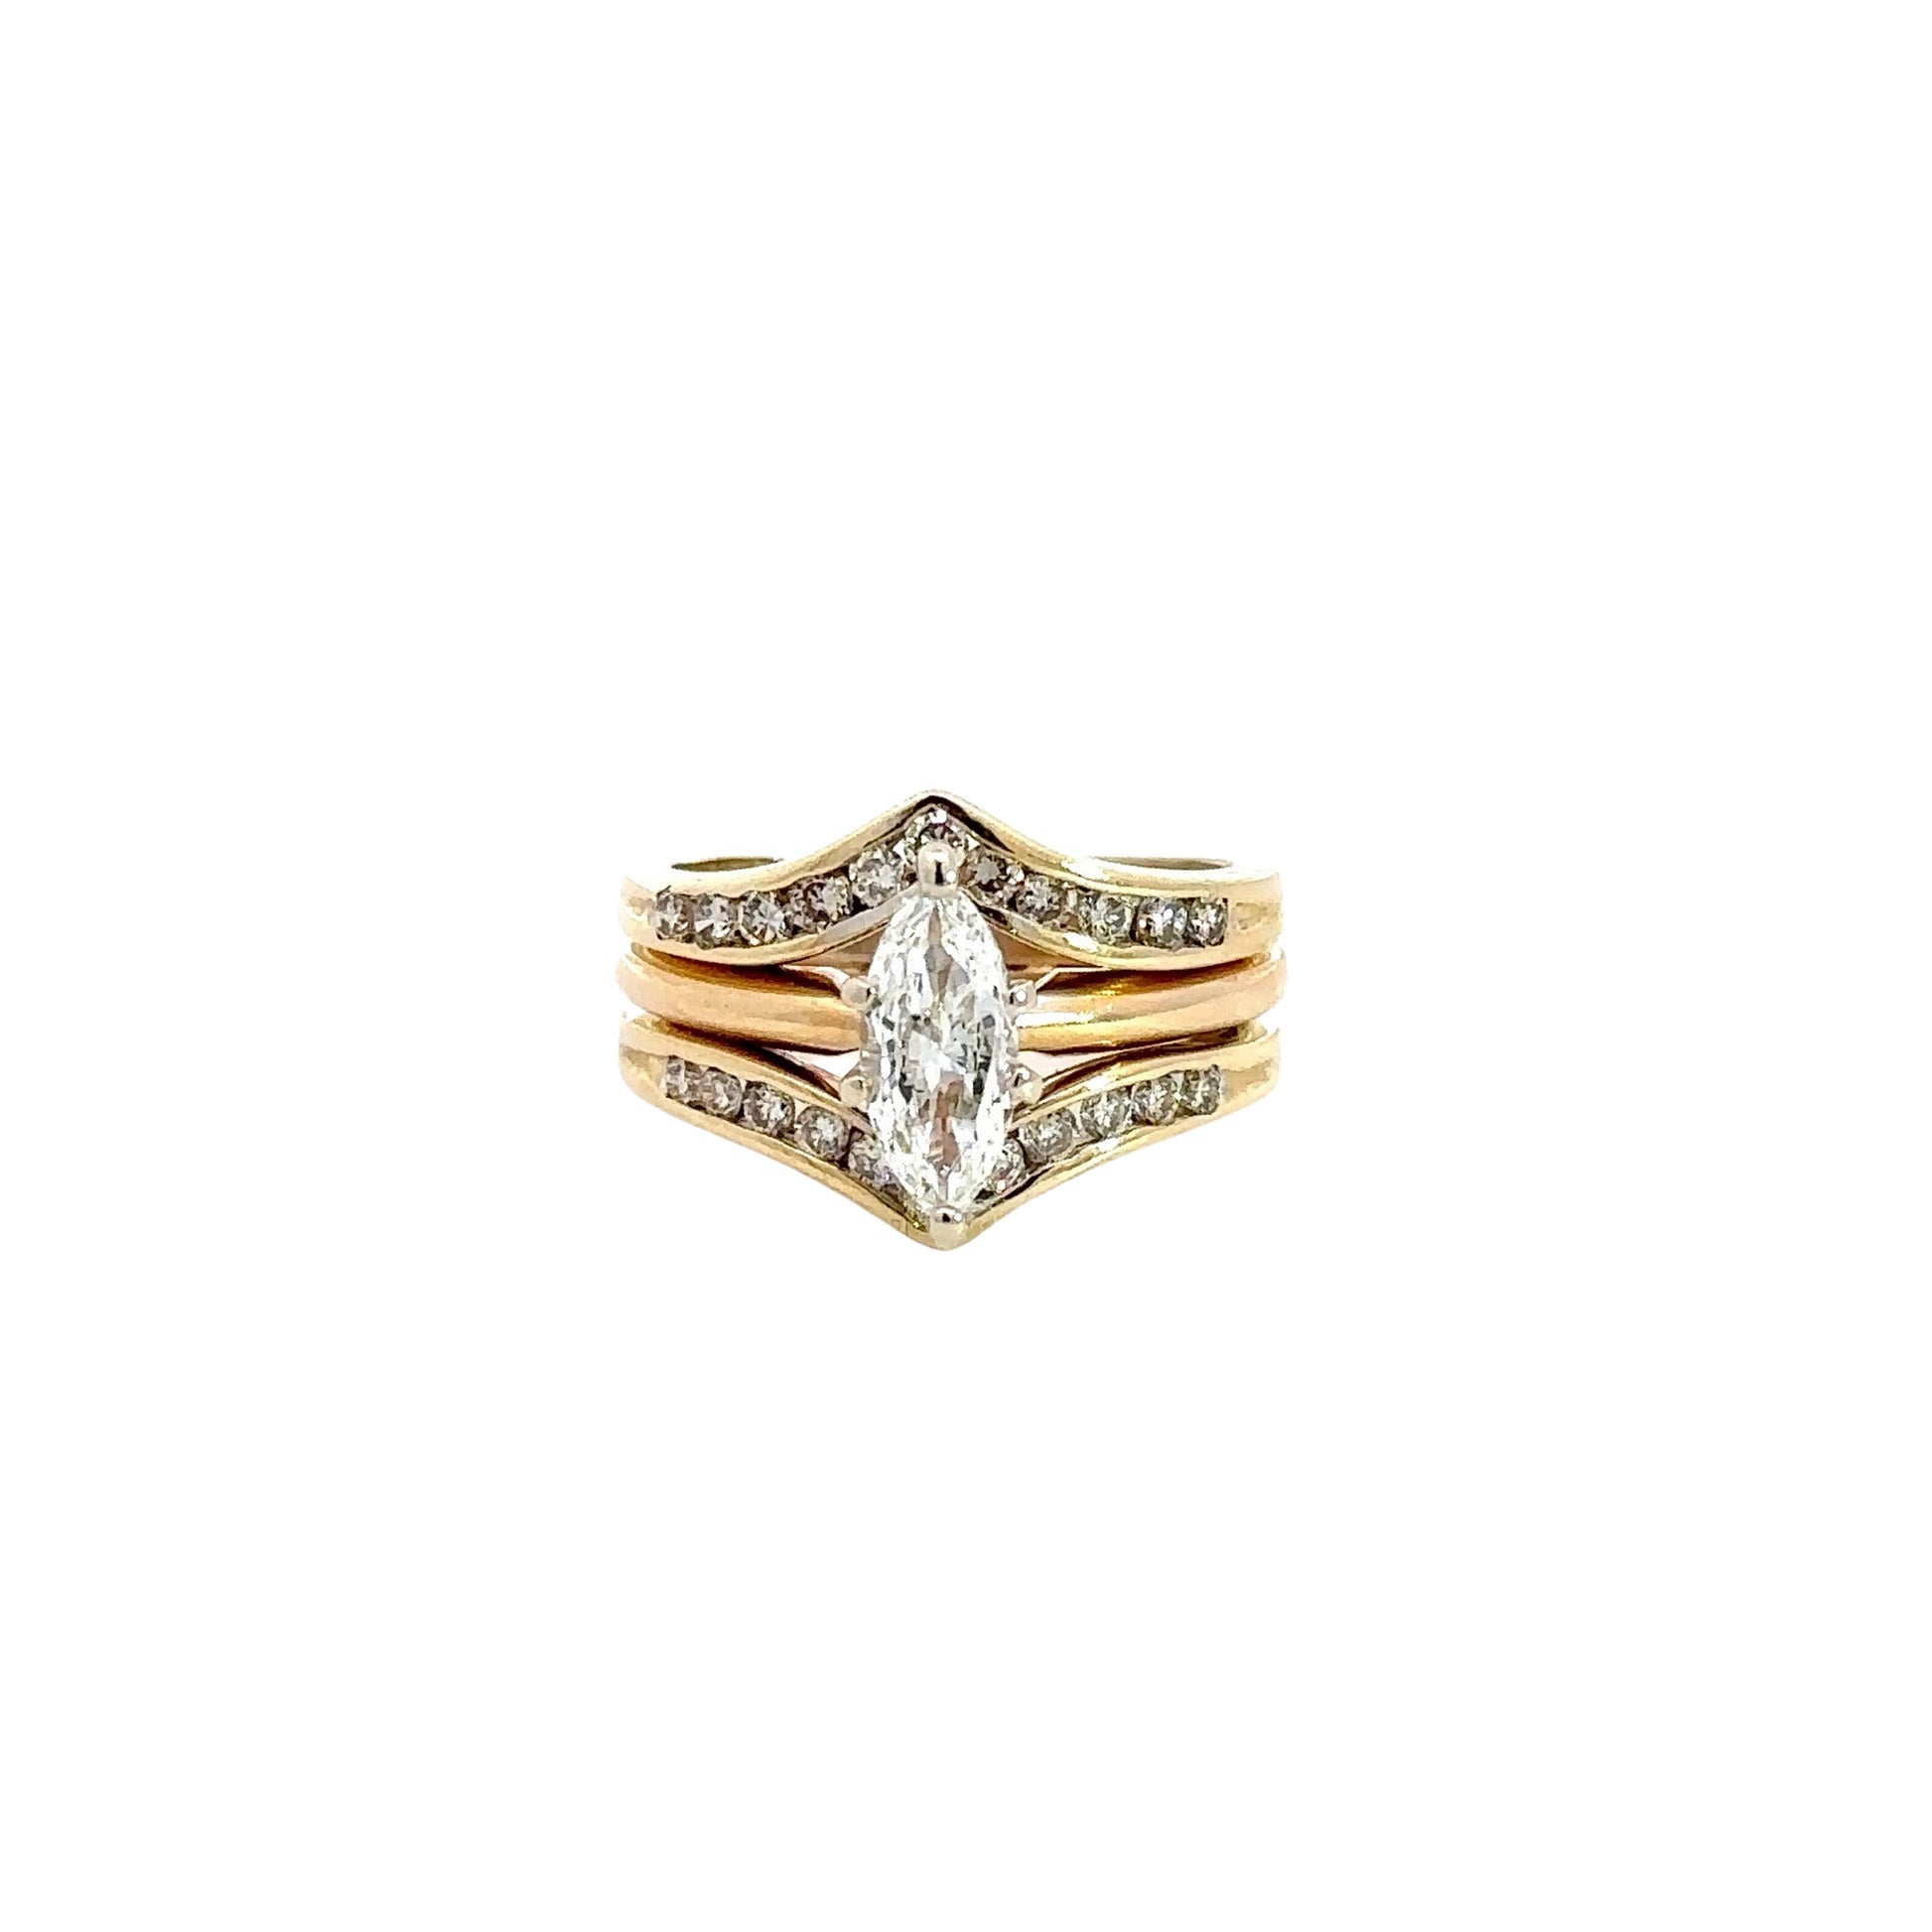 yellow gold ring with diamond marquise center stone and 2 attached bands with small round diamonds